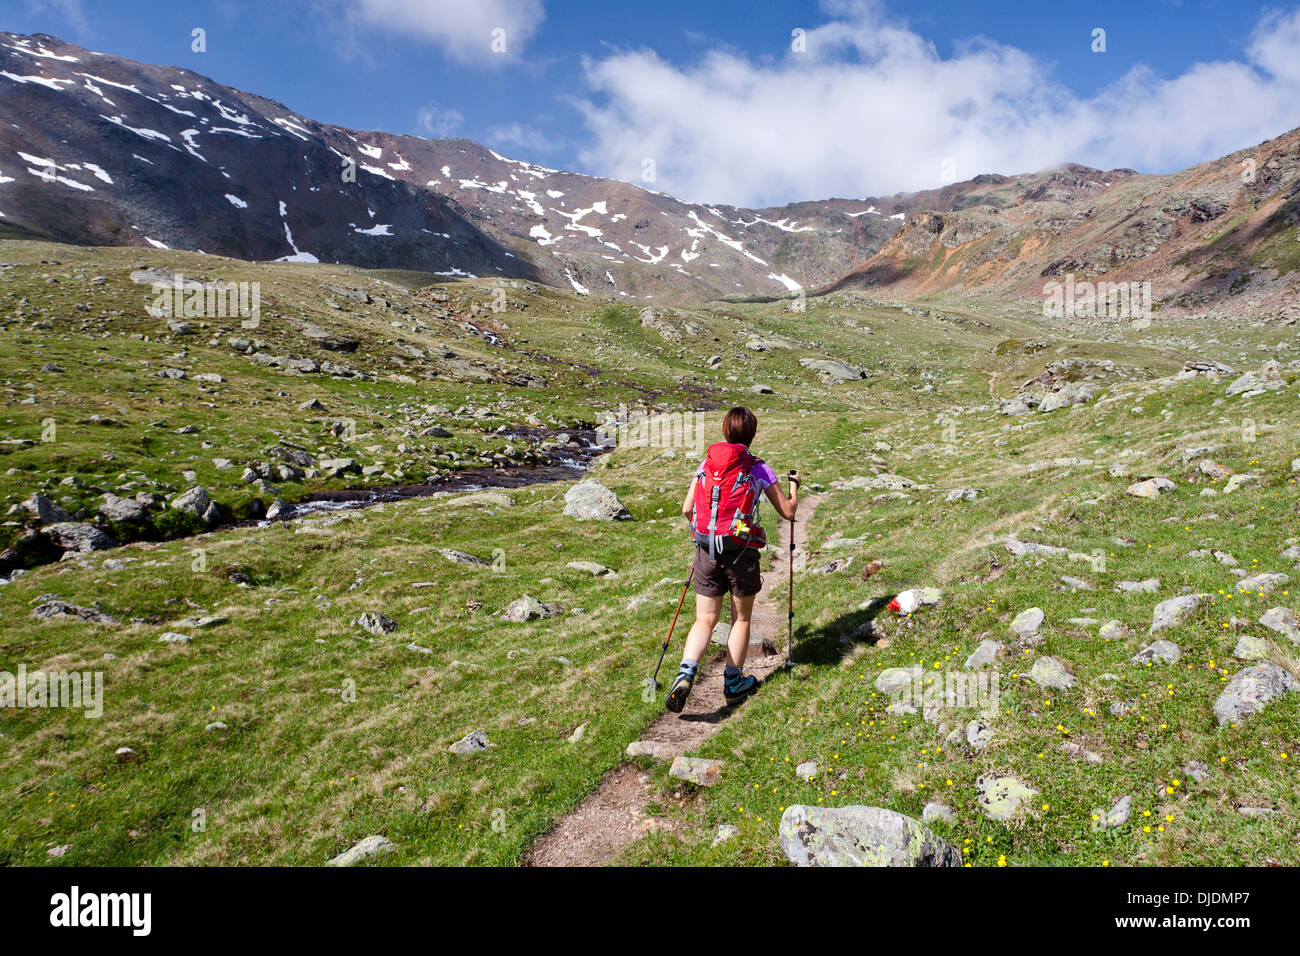 Female hiker in the Ulten Valley or Val d'Ultimo, summit of Mt Gleckspitz at back, South Tyrol, Trentino-Alto Adige, Italy Stock Photo